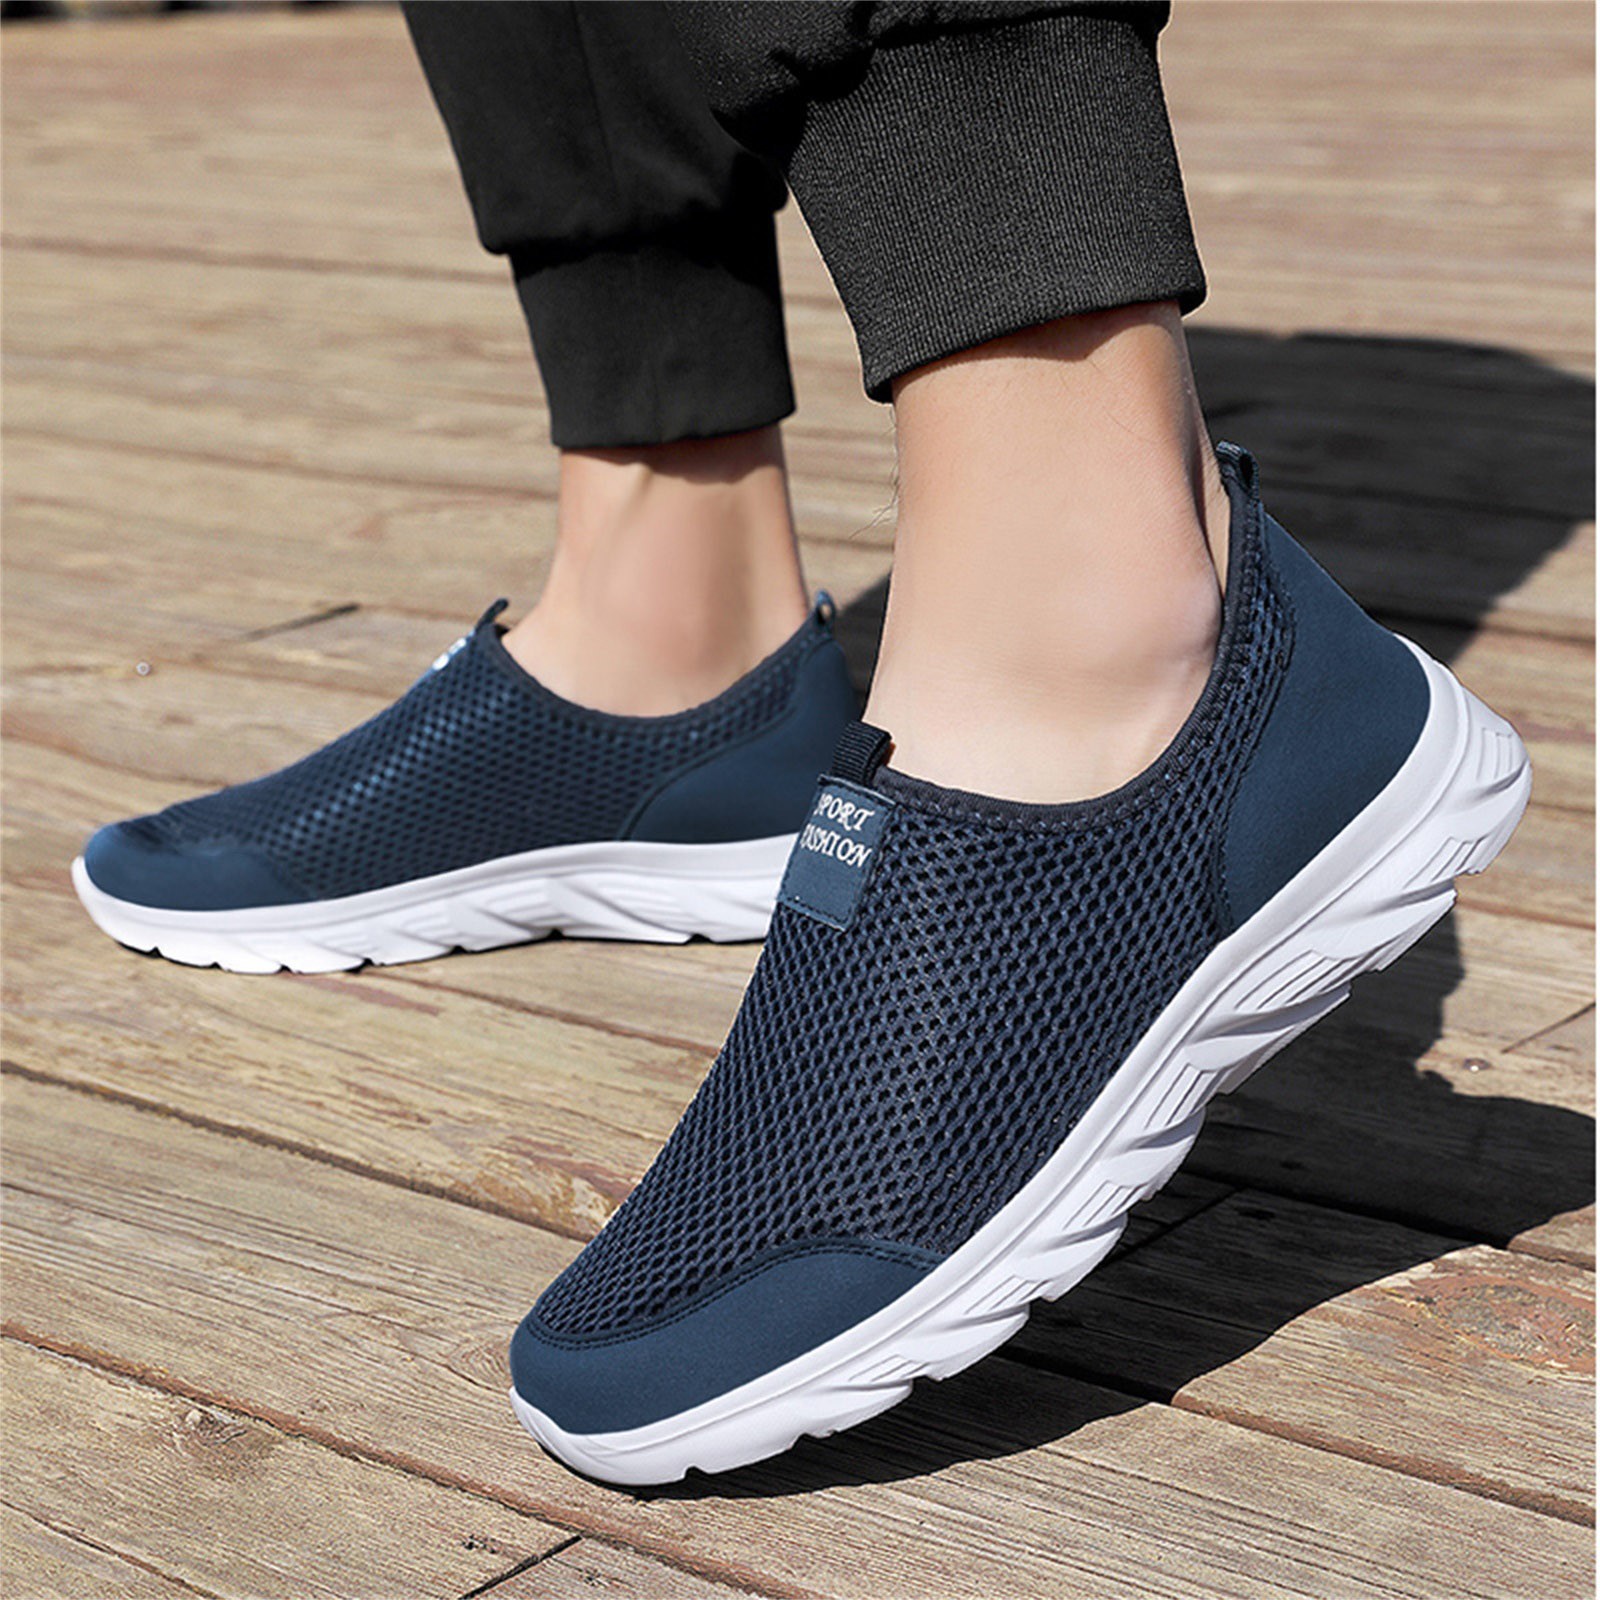 WOXINDA Men Shoes Summer Lightweight Breathable Casual Shoes Single ...